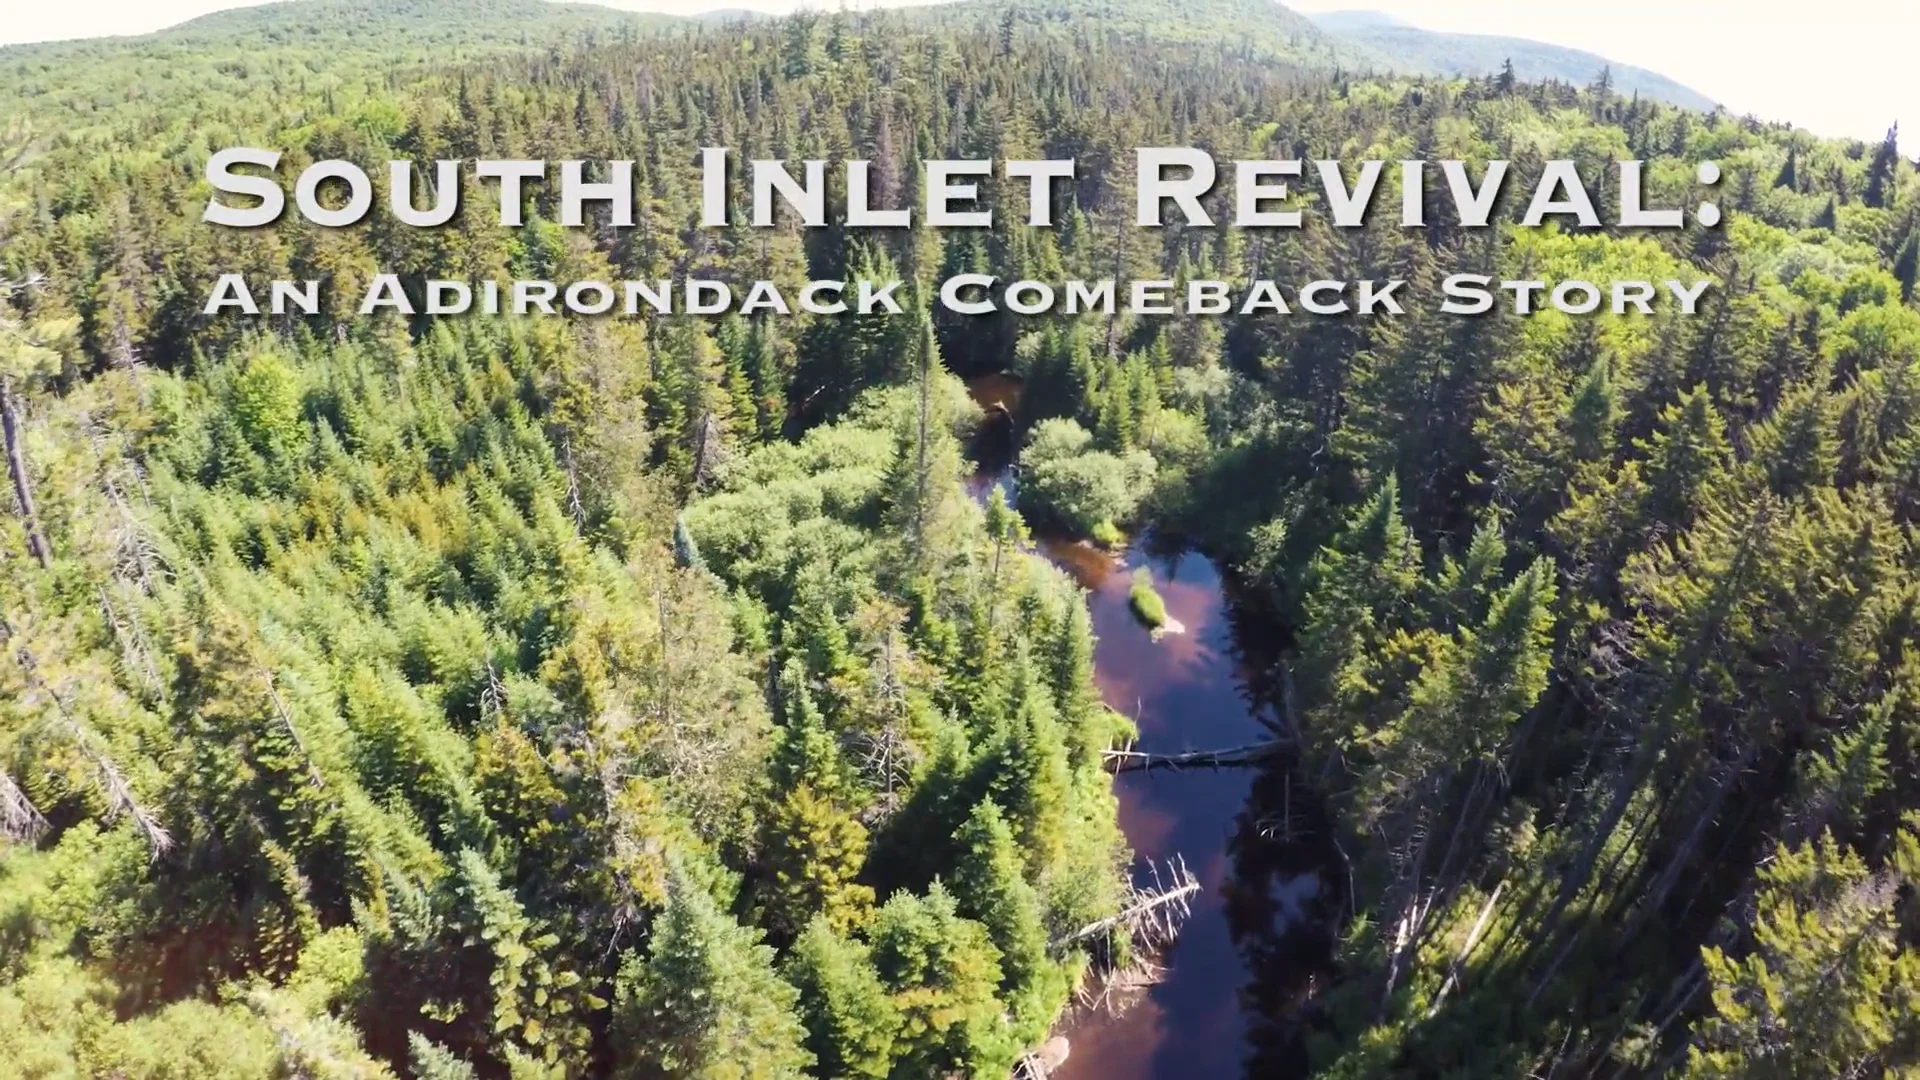 South Inlet Revival: An Adirondack Comeback Story on Vimeo